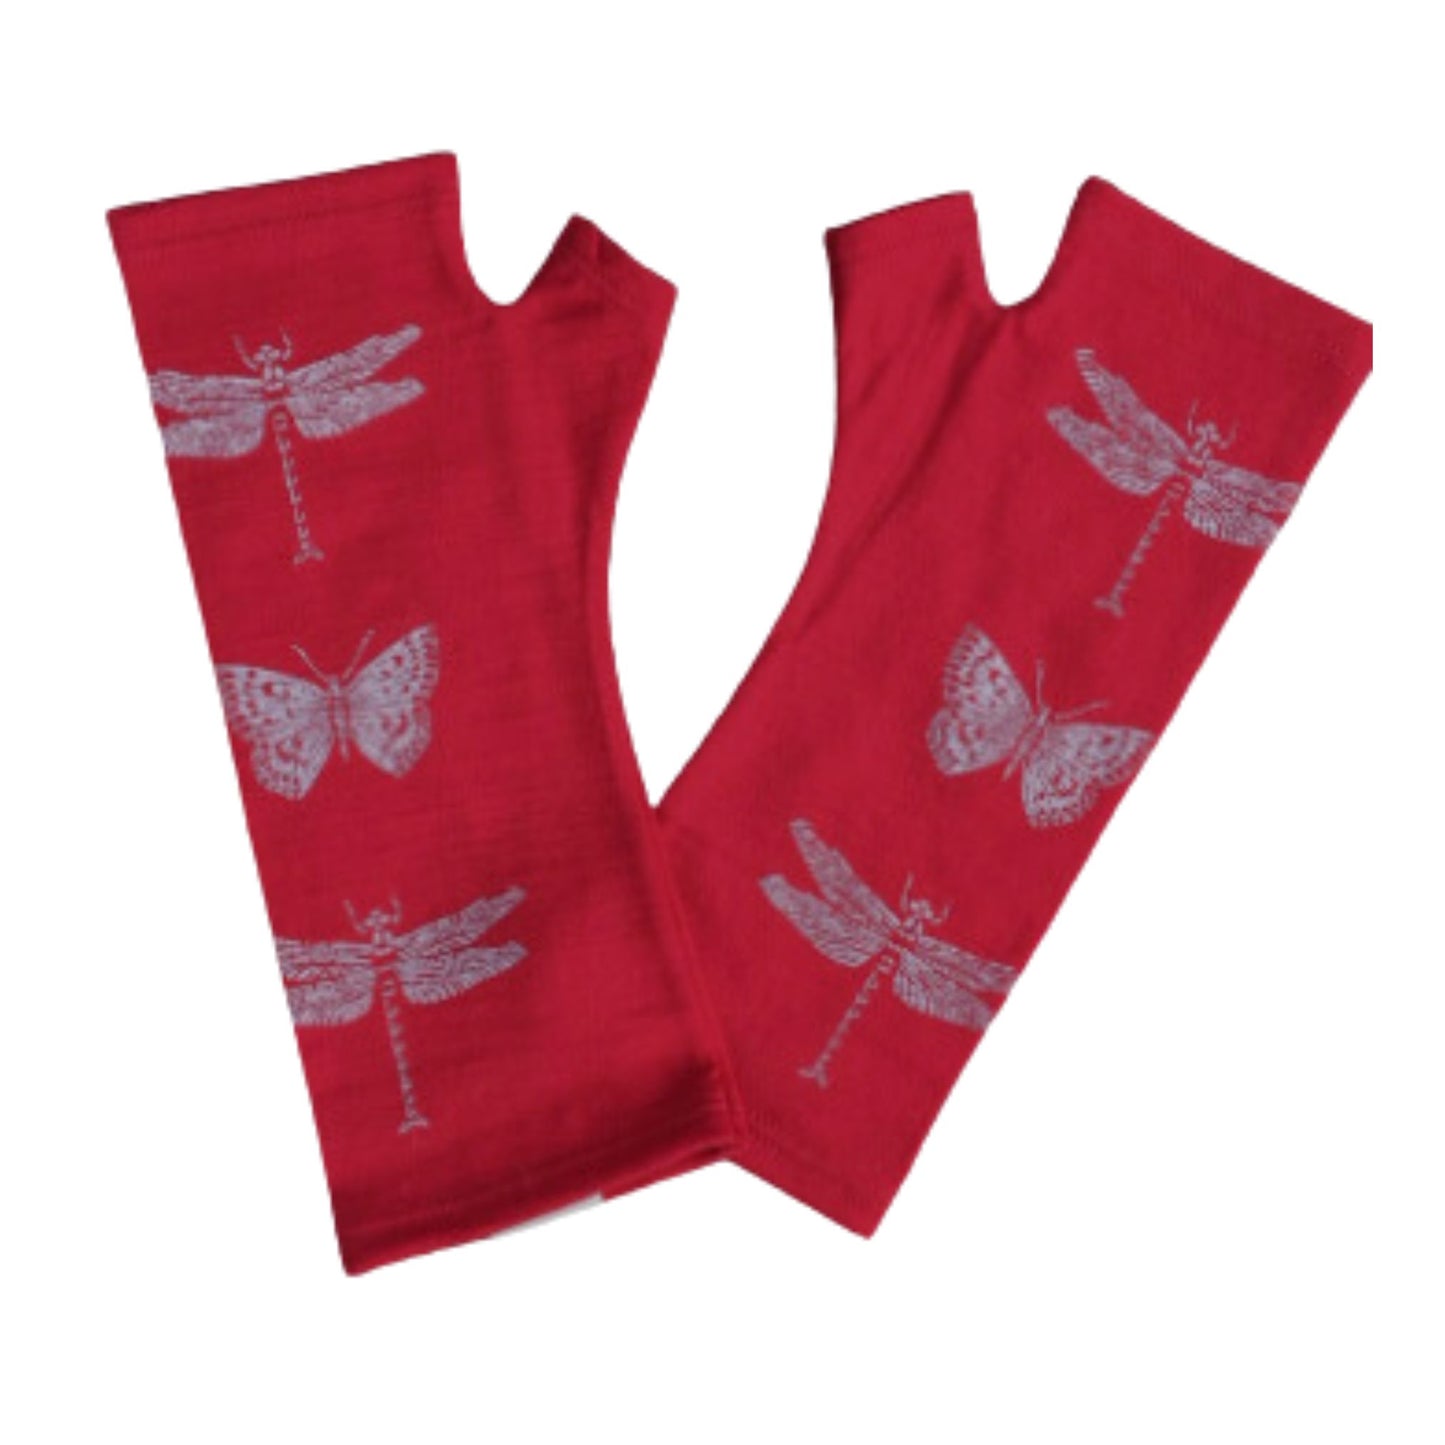 Merino Wool Gloves - Red Dragonfly and made in New Zealand by Kate Watts. Just beautiful